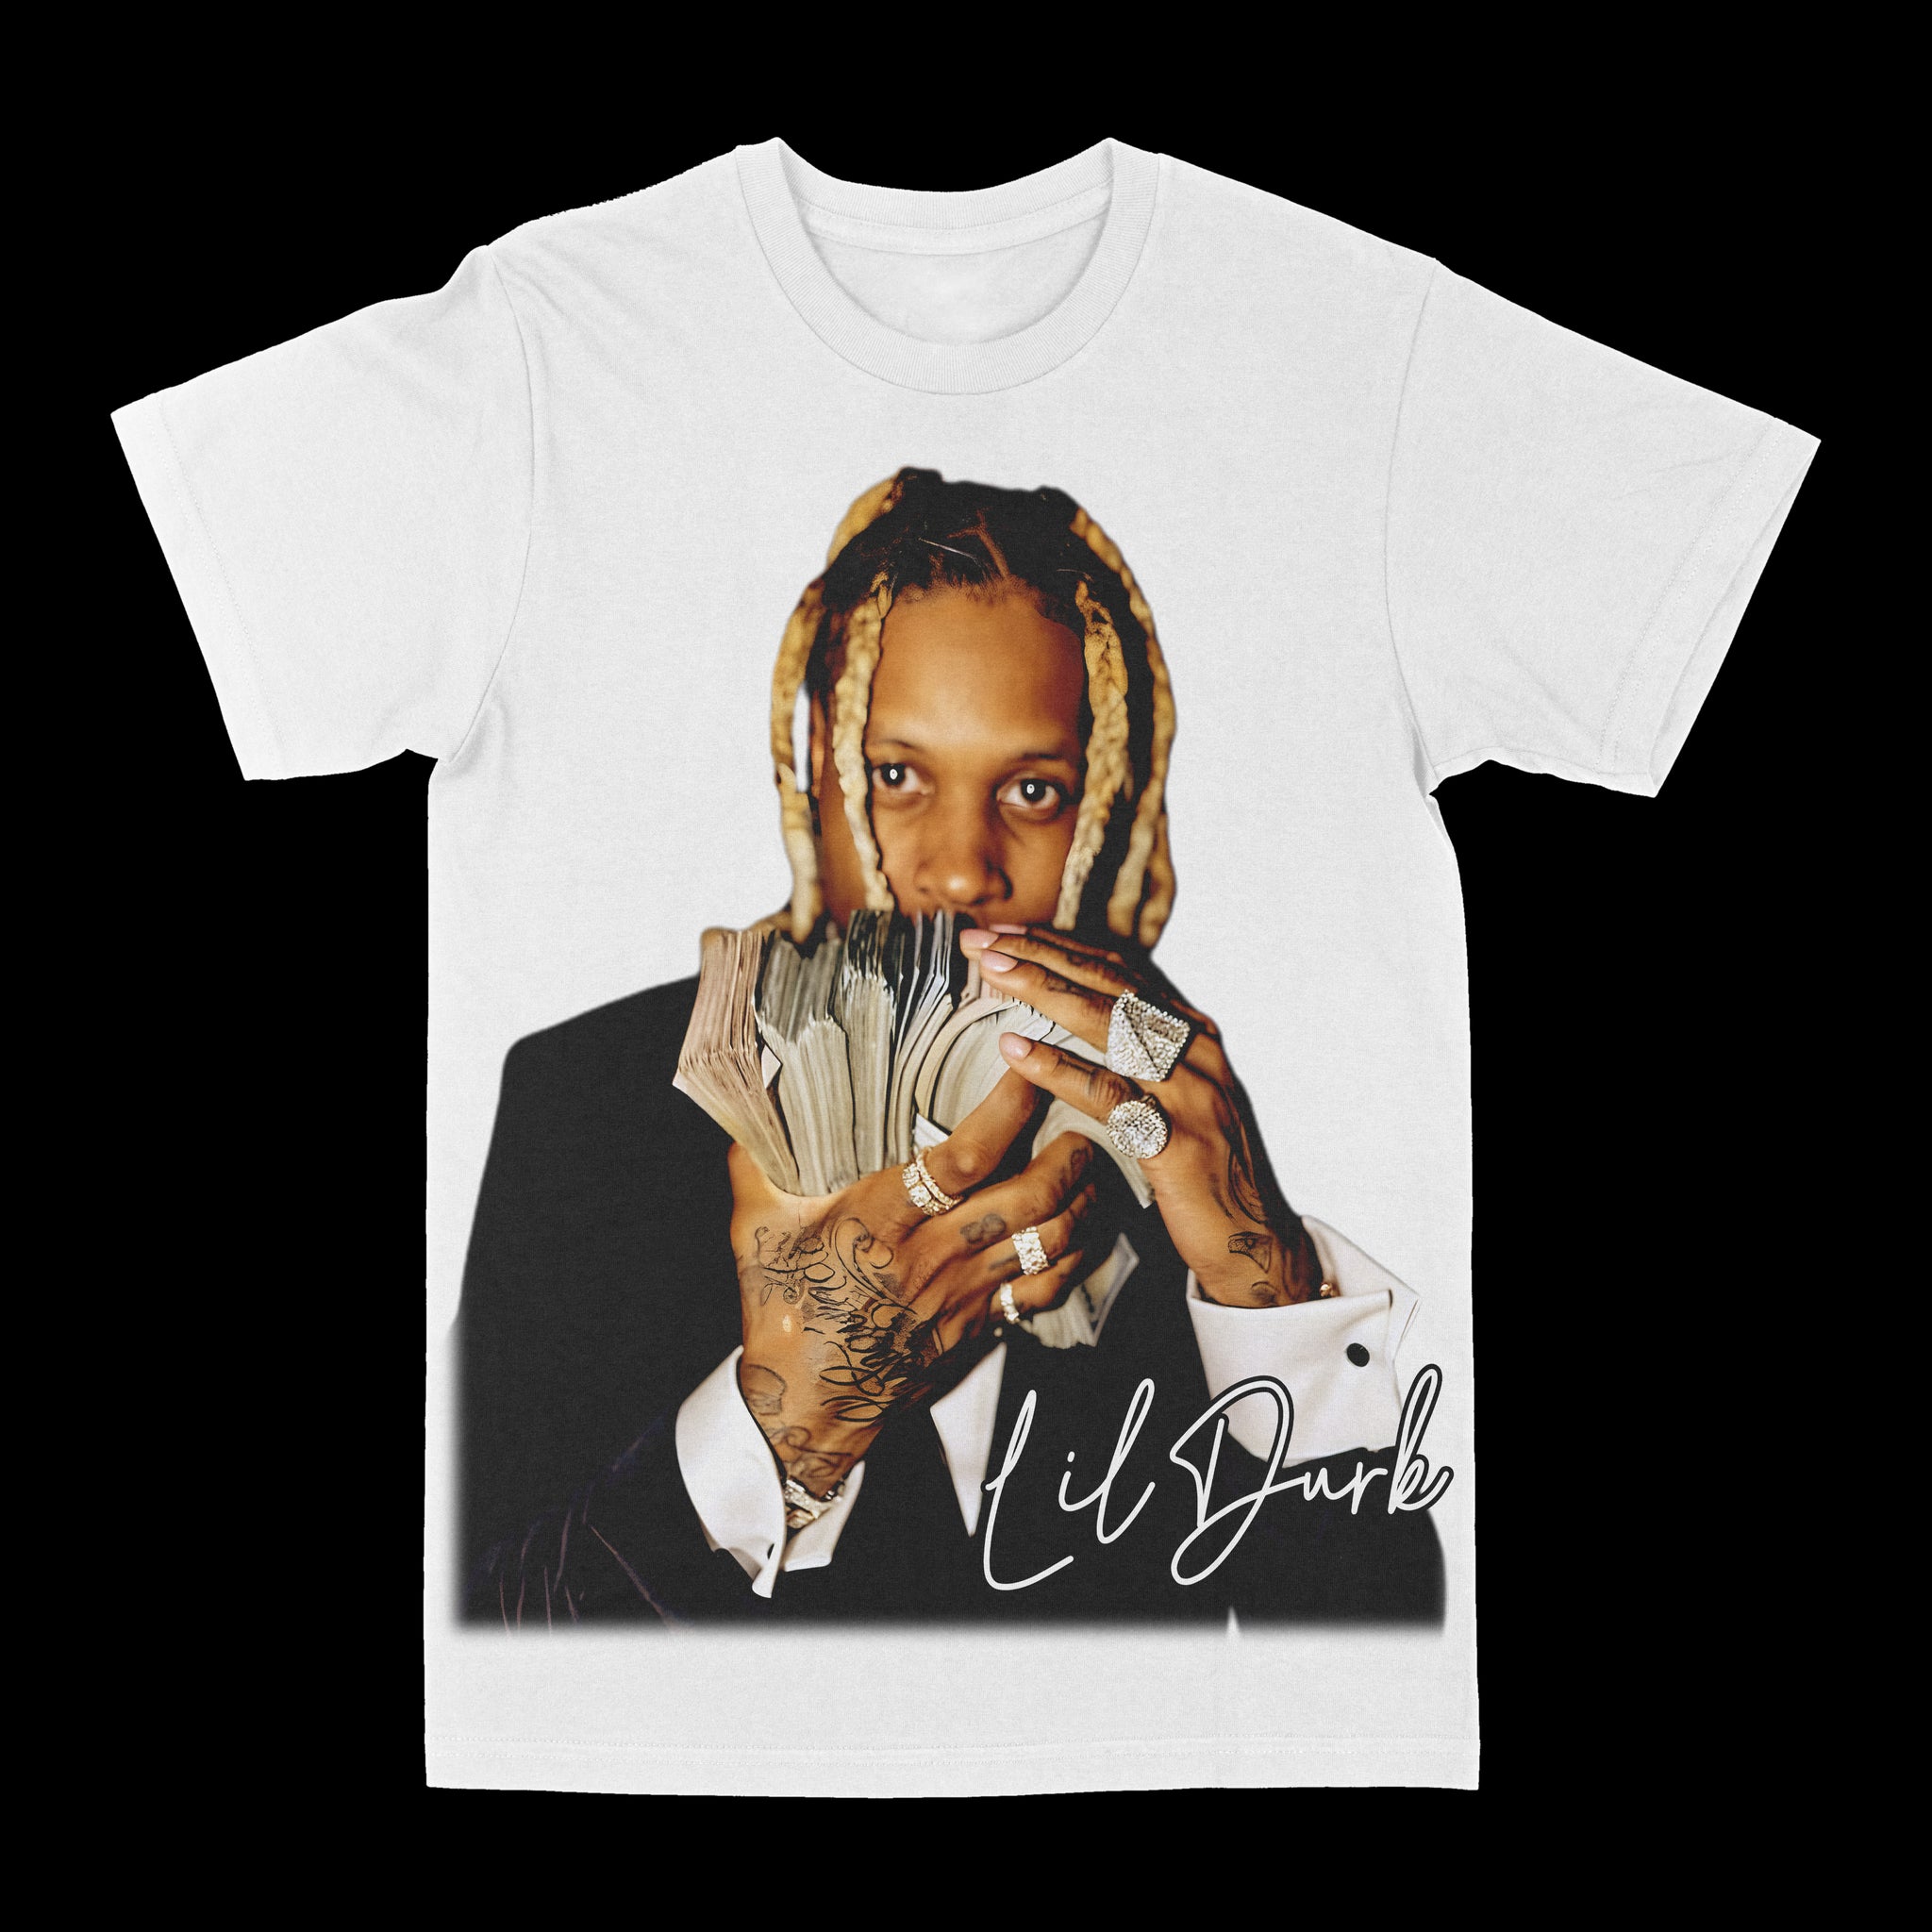 Lil Durk "Holding Paper" Graphic Tee